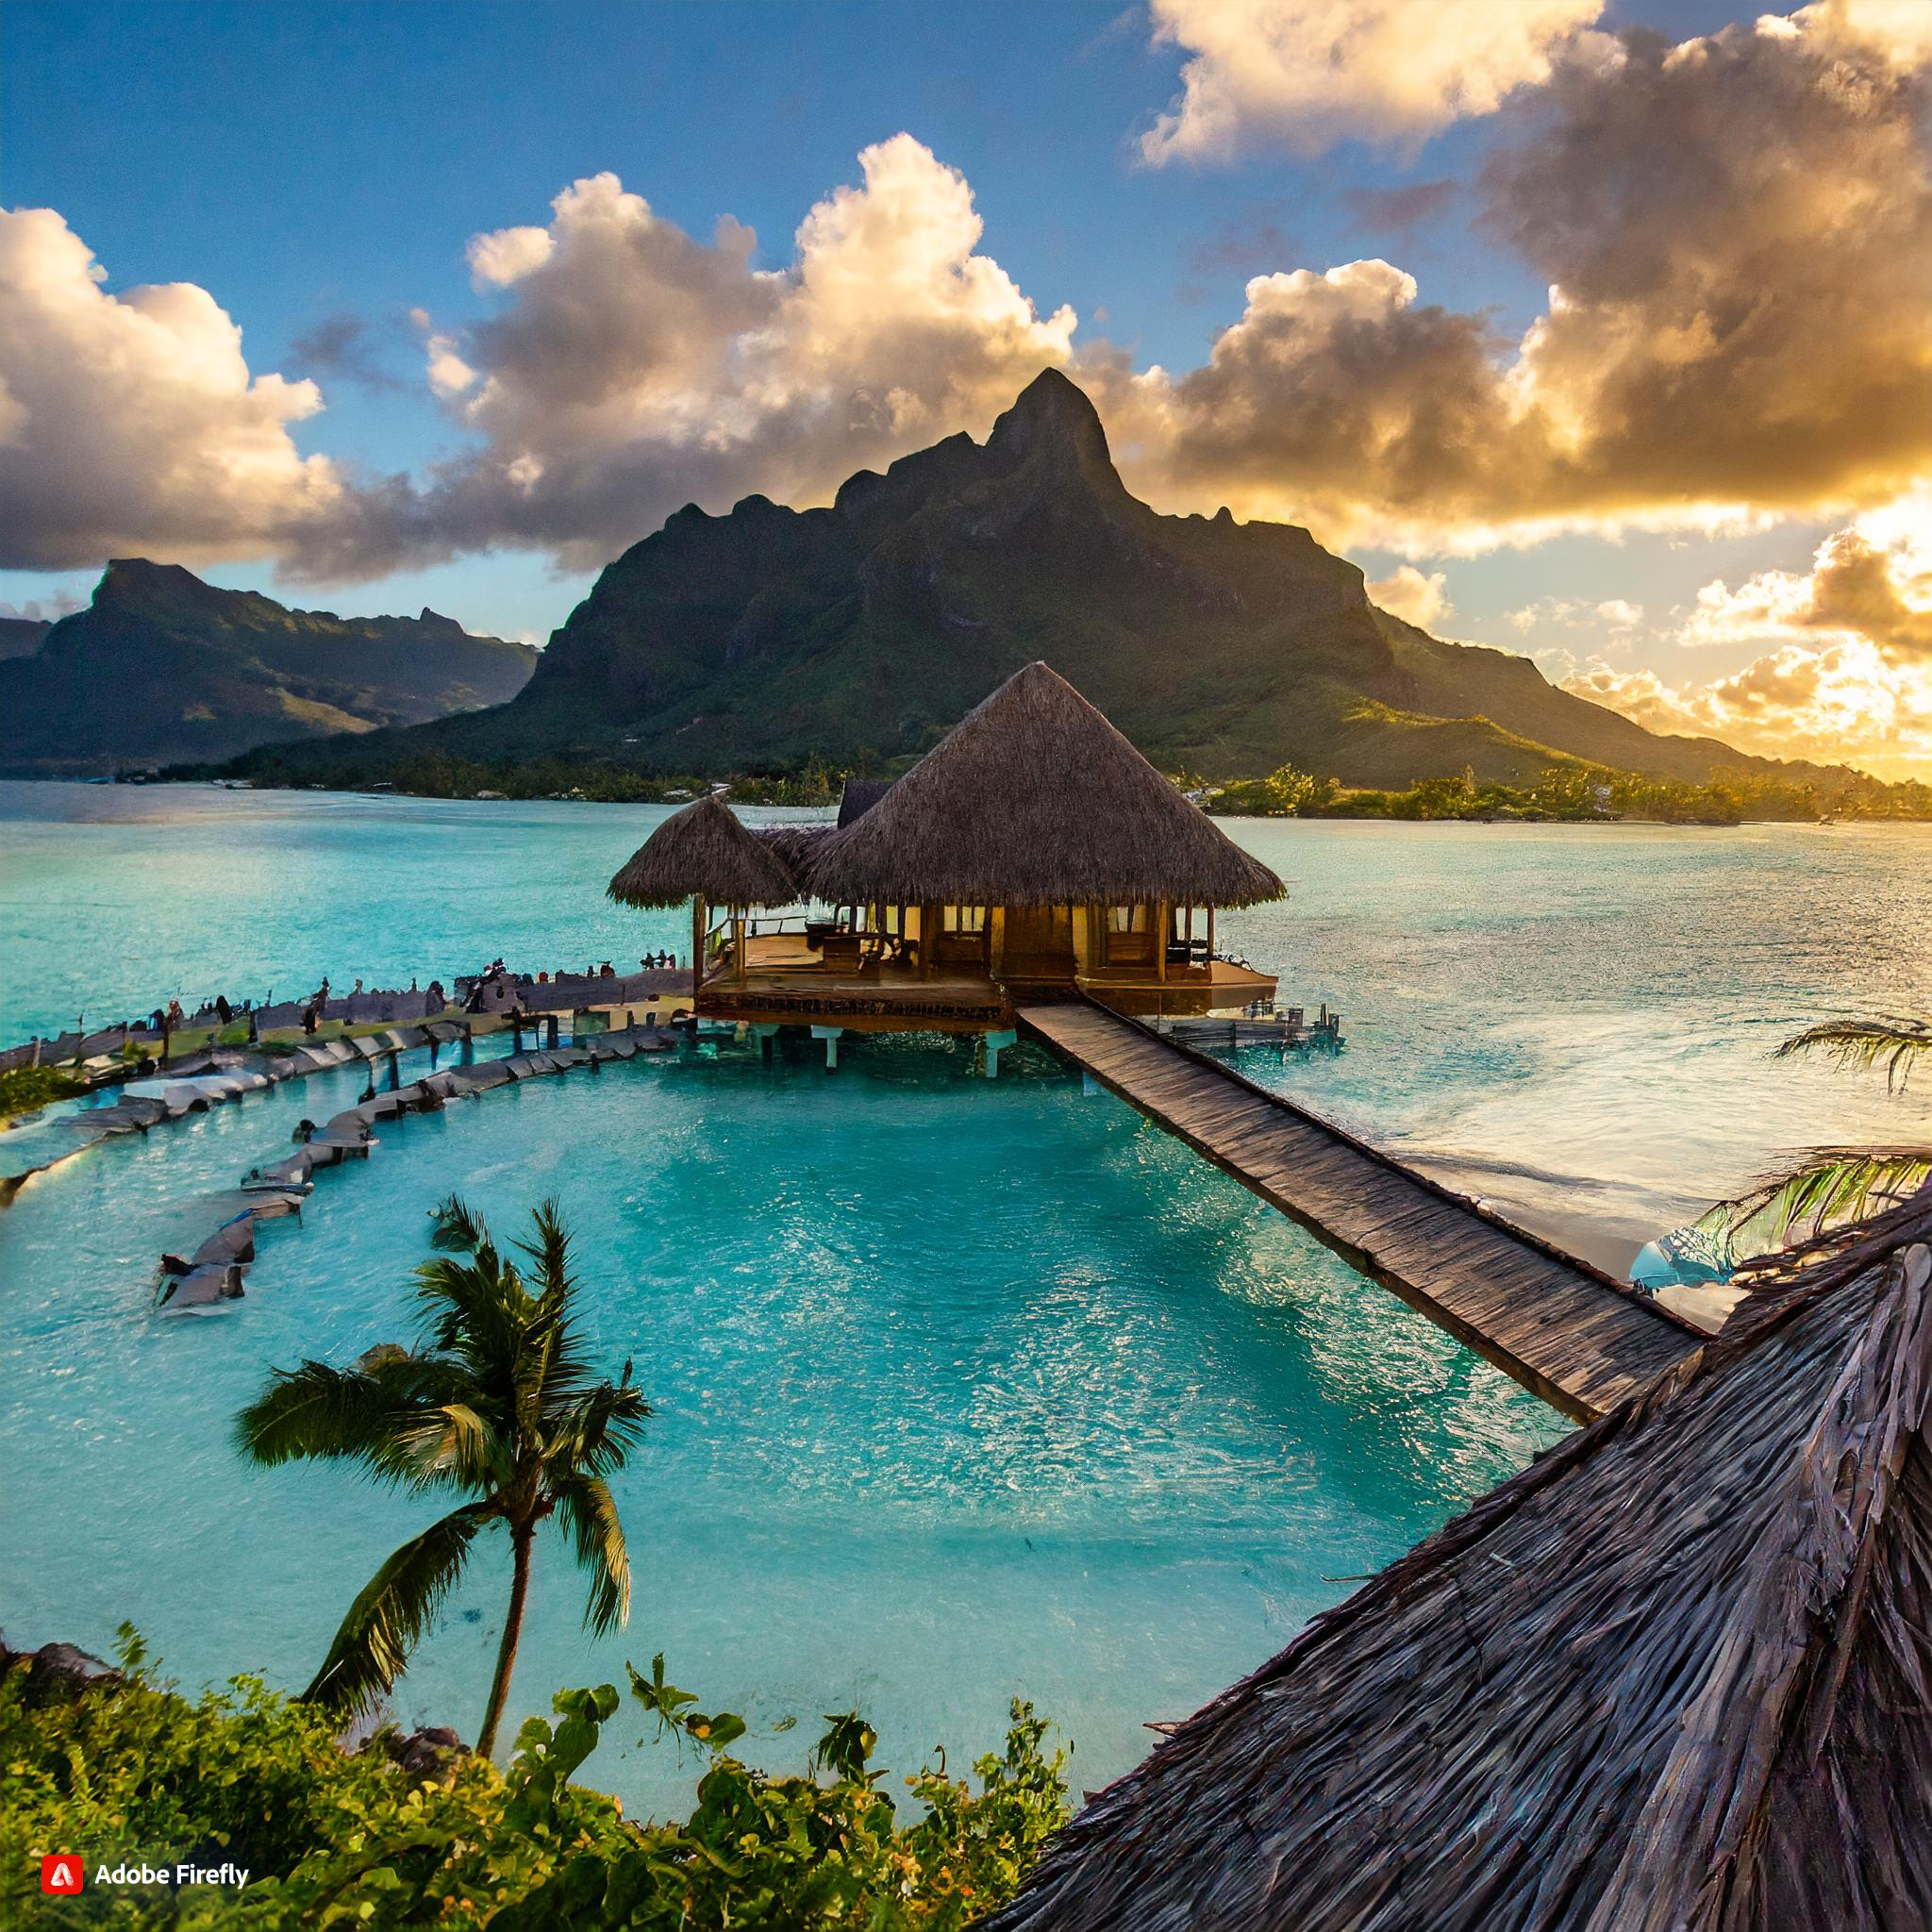  Bora Bora, Hawaii hut hotel on top of the ocean, bridge to the land, more islands at the distsance, sunset, plam trees, and ocean view